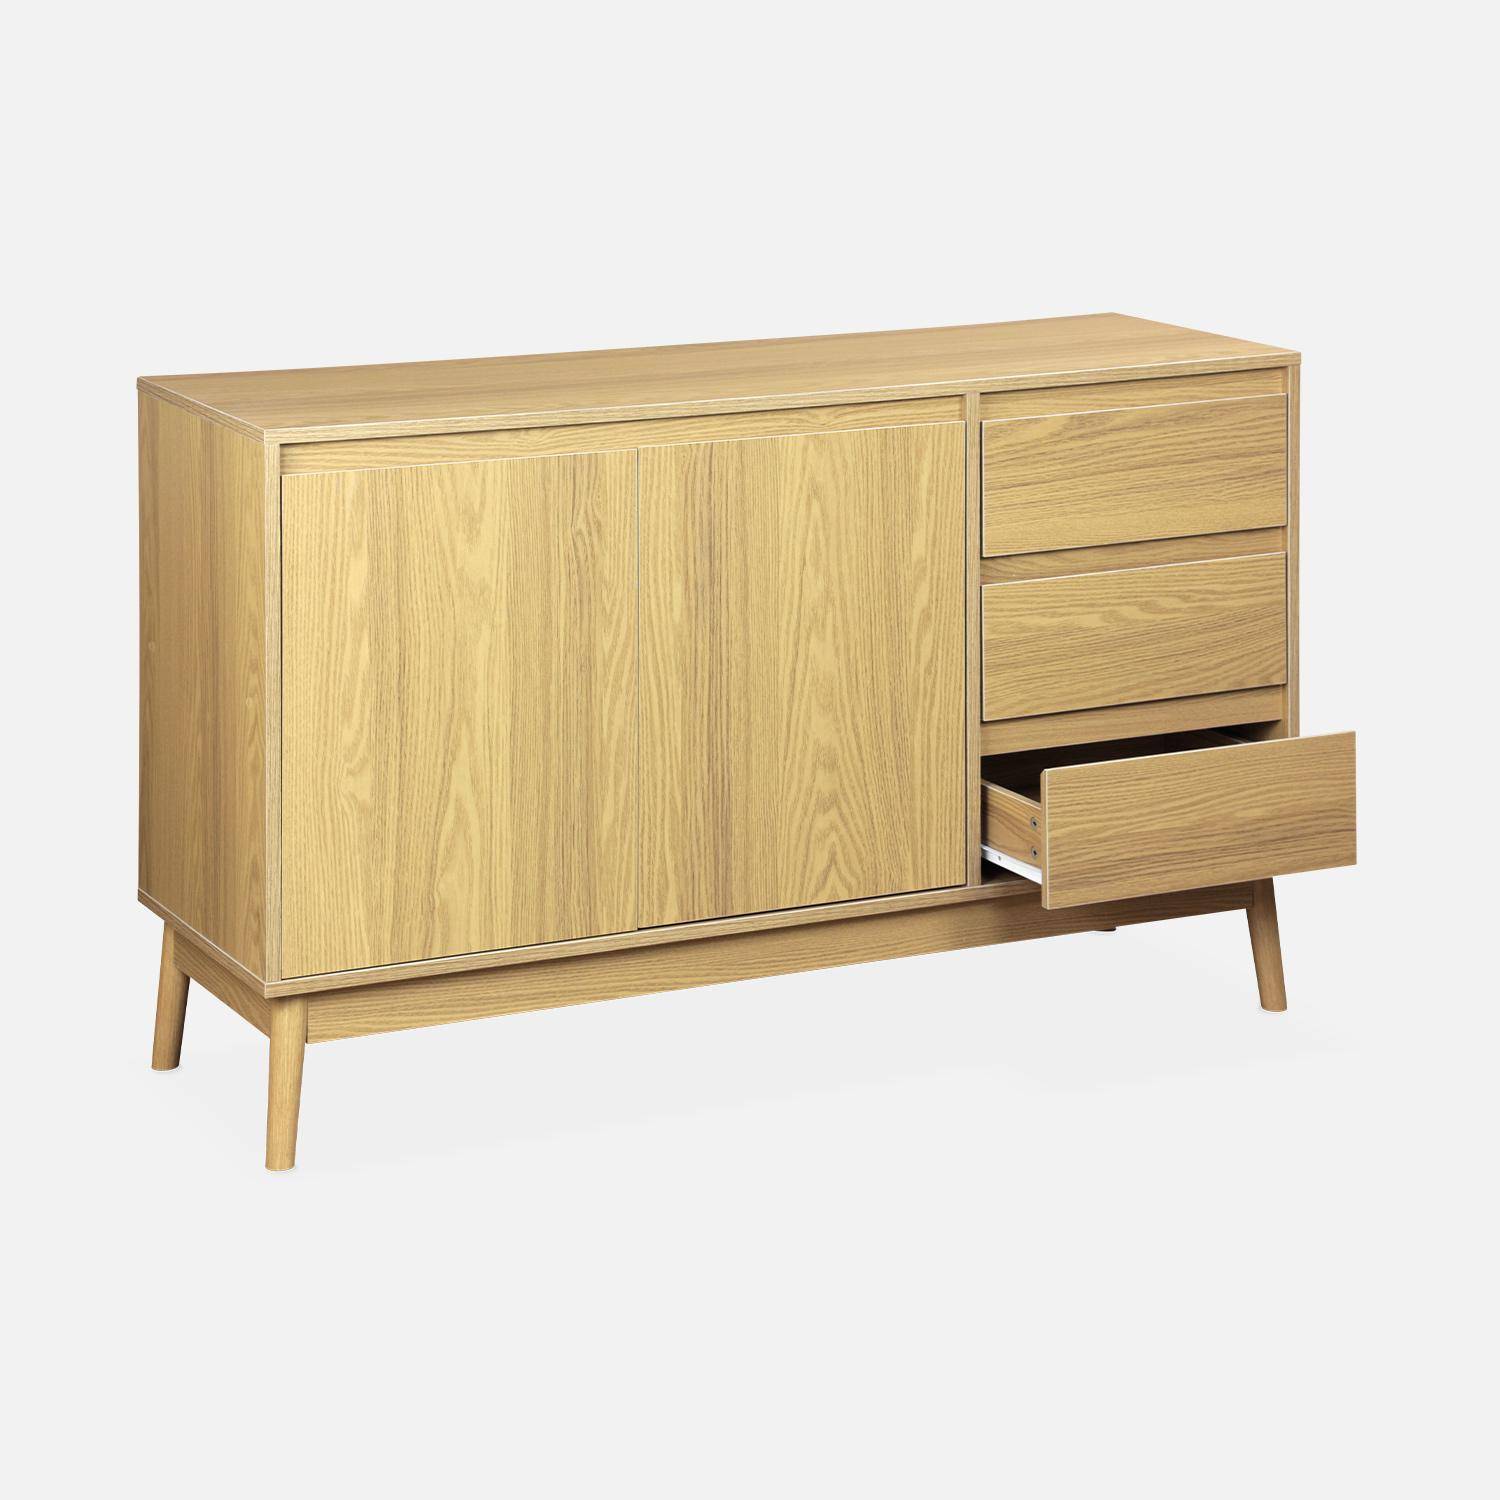 Wooden sideboard with 2 doors and 3 drawers L 120 x W 39 H 76cm - Dune Photo5